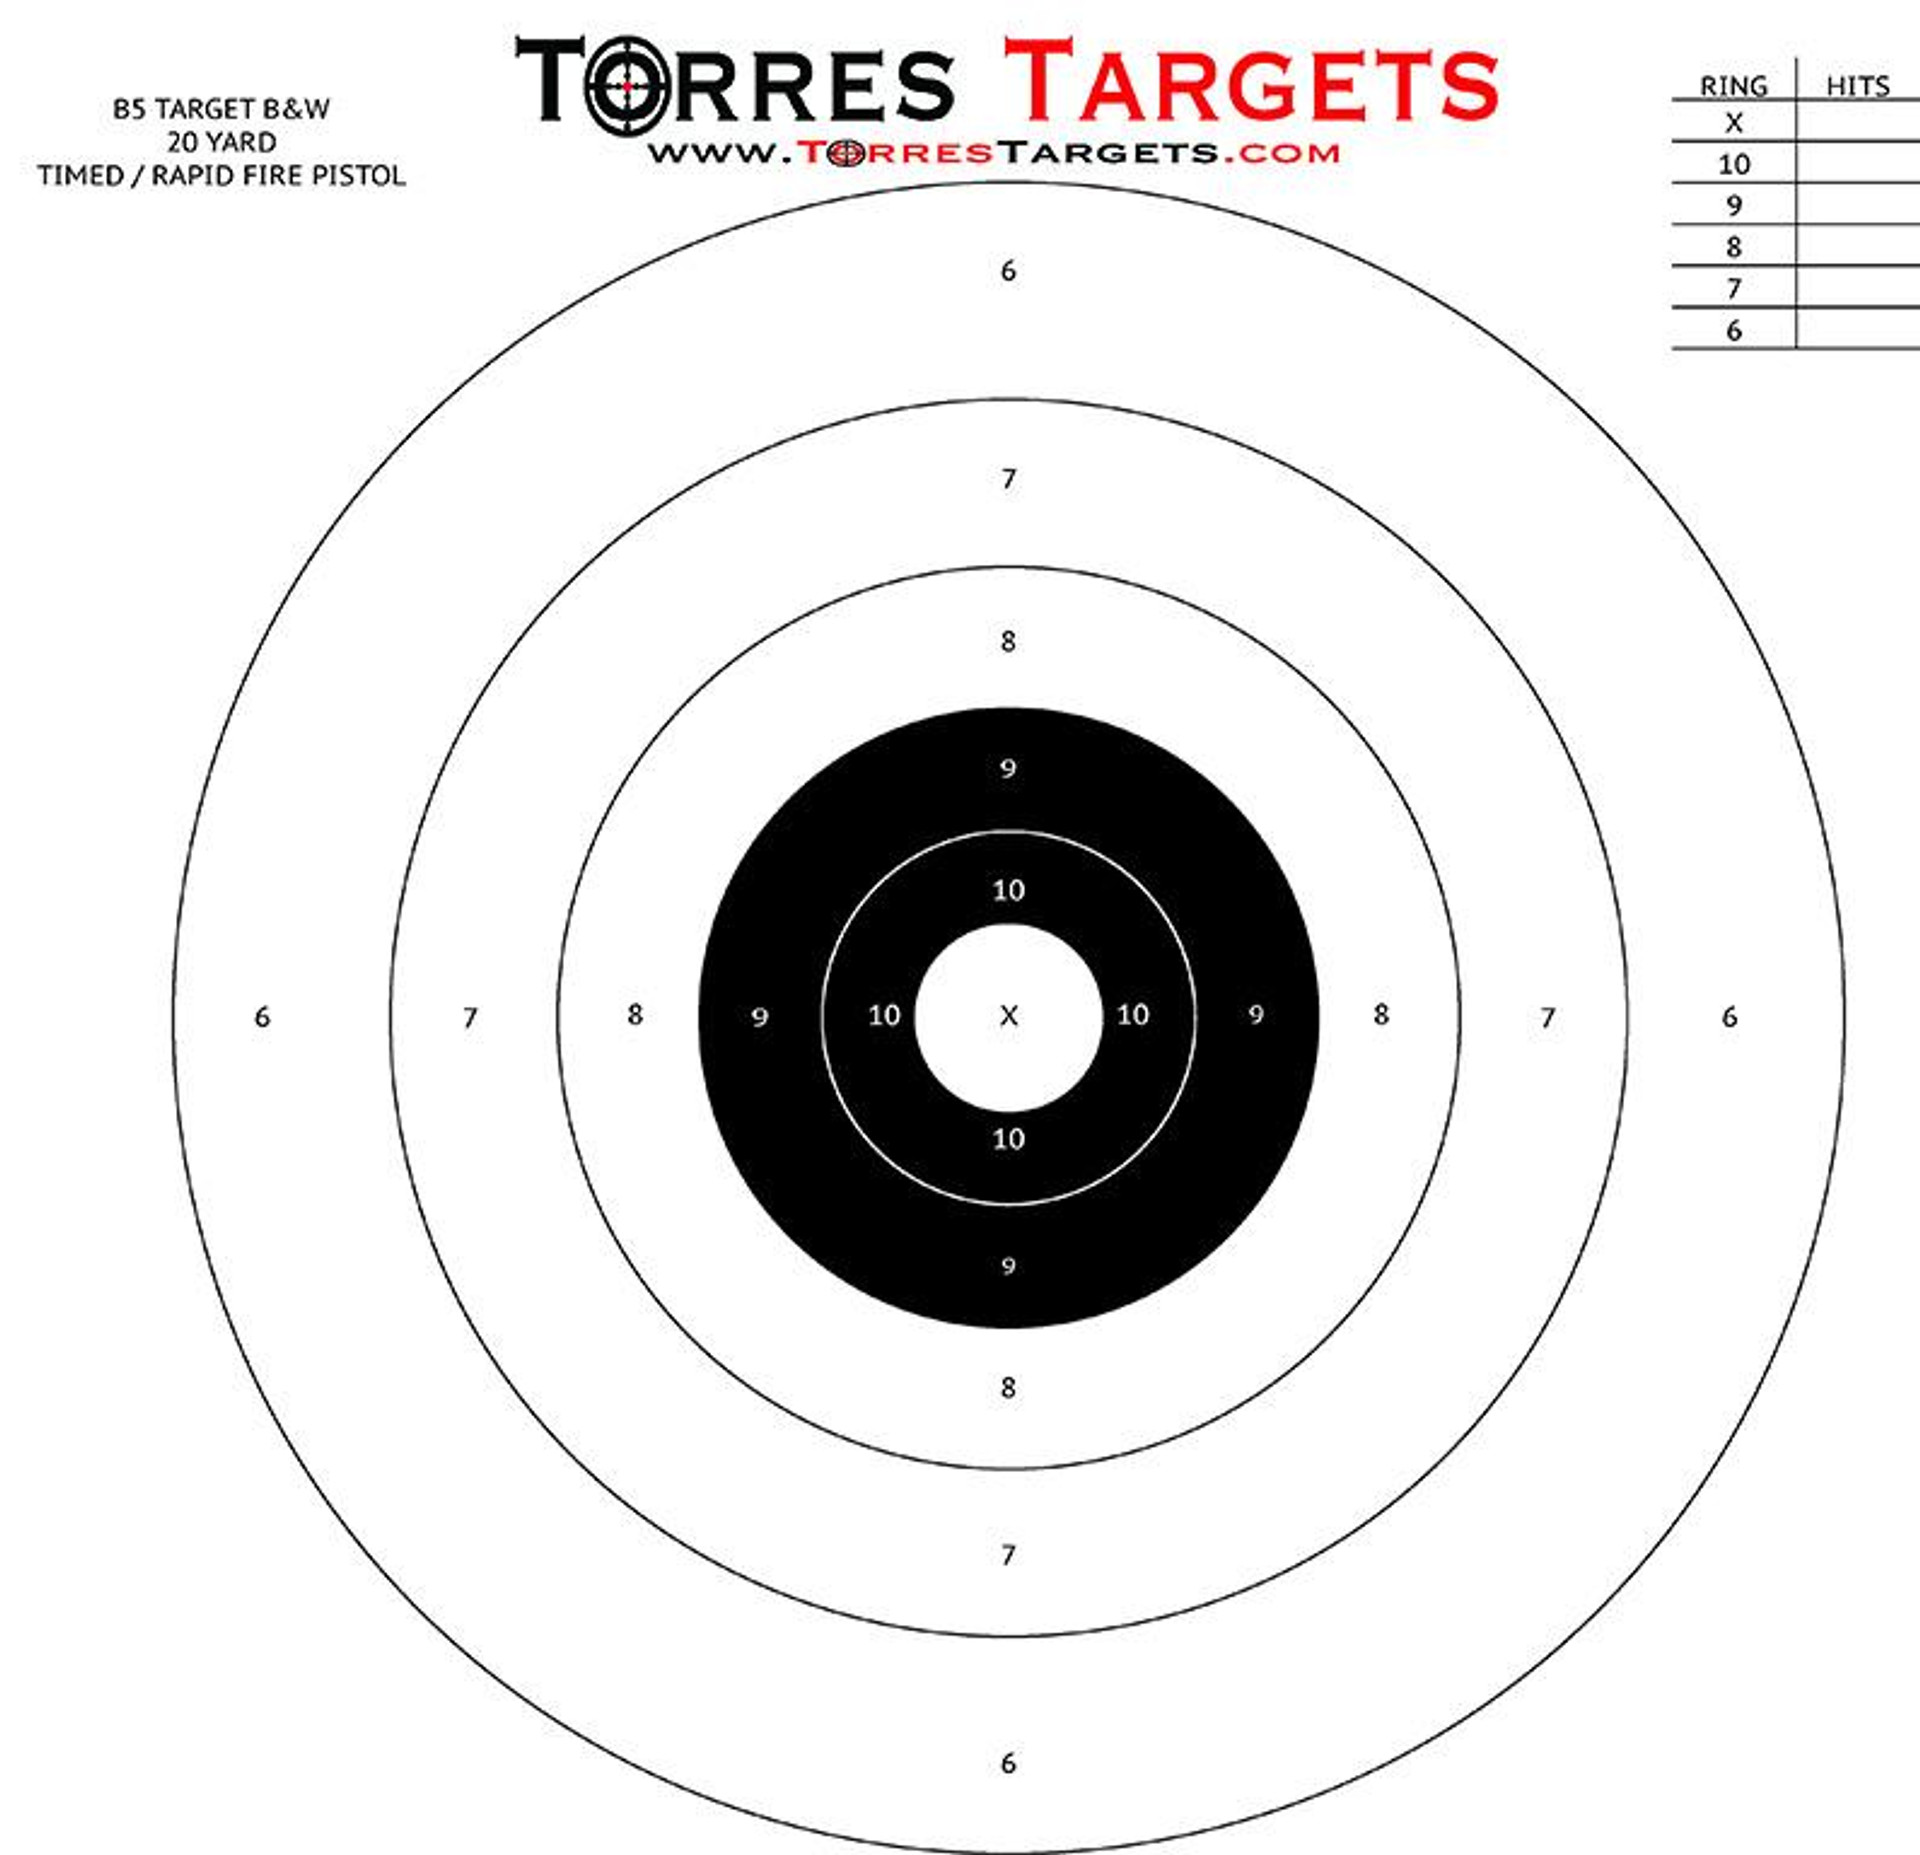 B5 Style Bullseye Target Black and White by Torres Targets